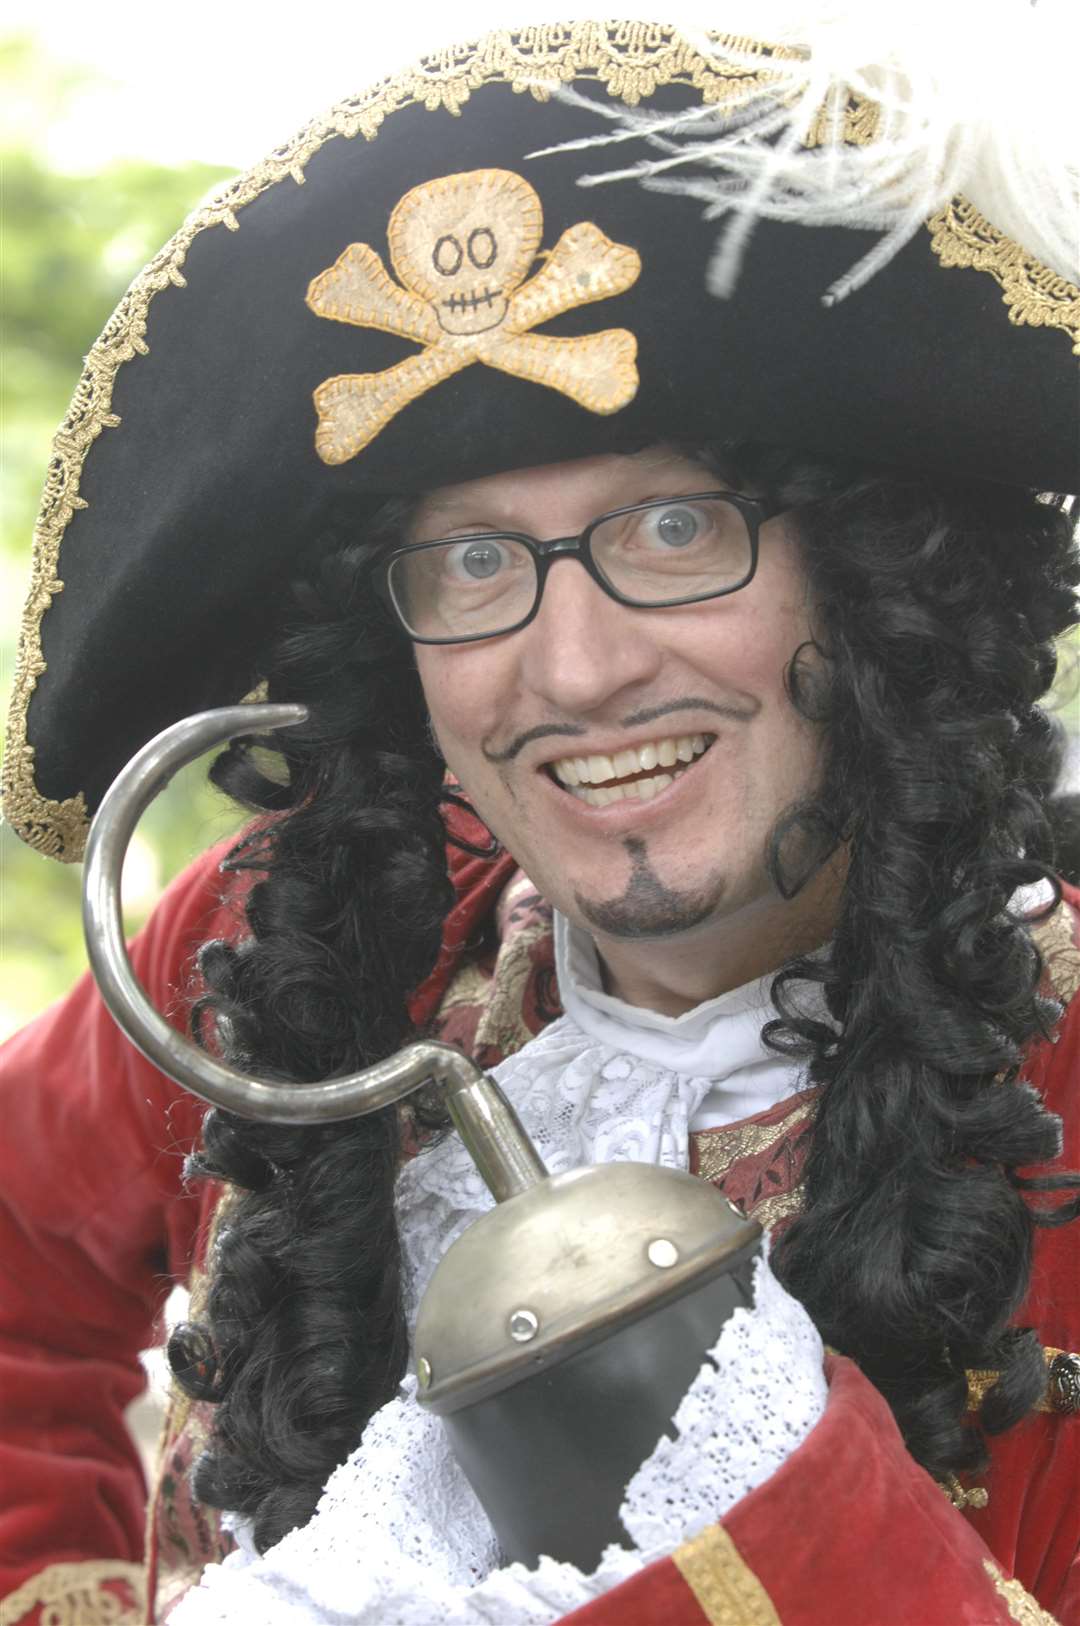 Ade Edmondson made a rare panto appearance as Captain Hook in Peter Pan. Last Christmas he had a role in the latest Star Wars movie